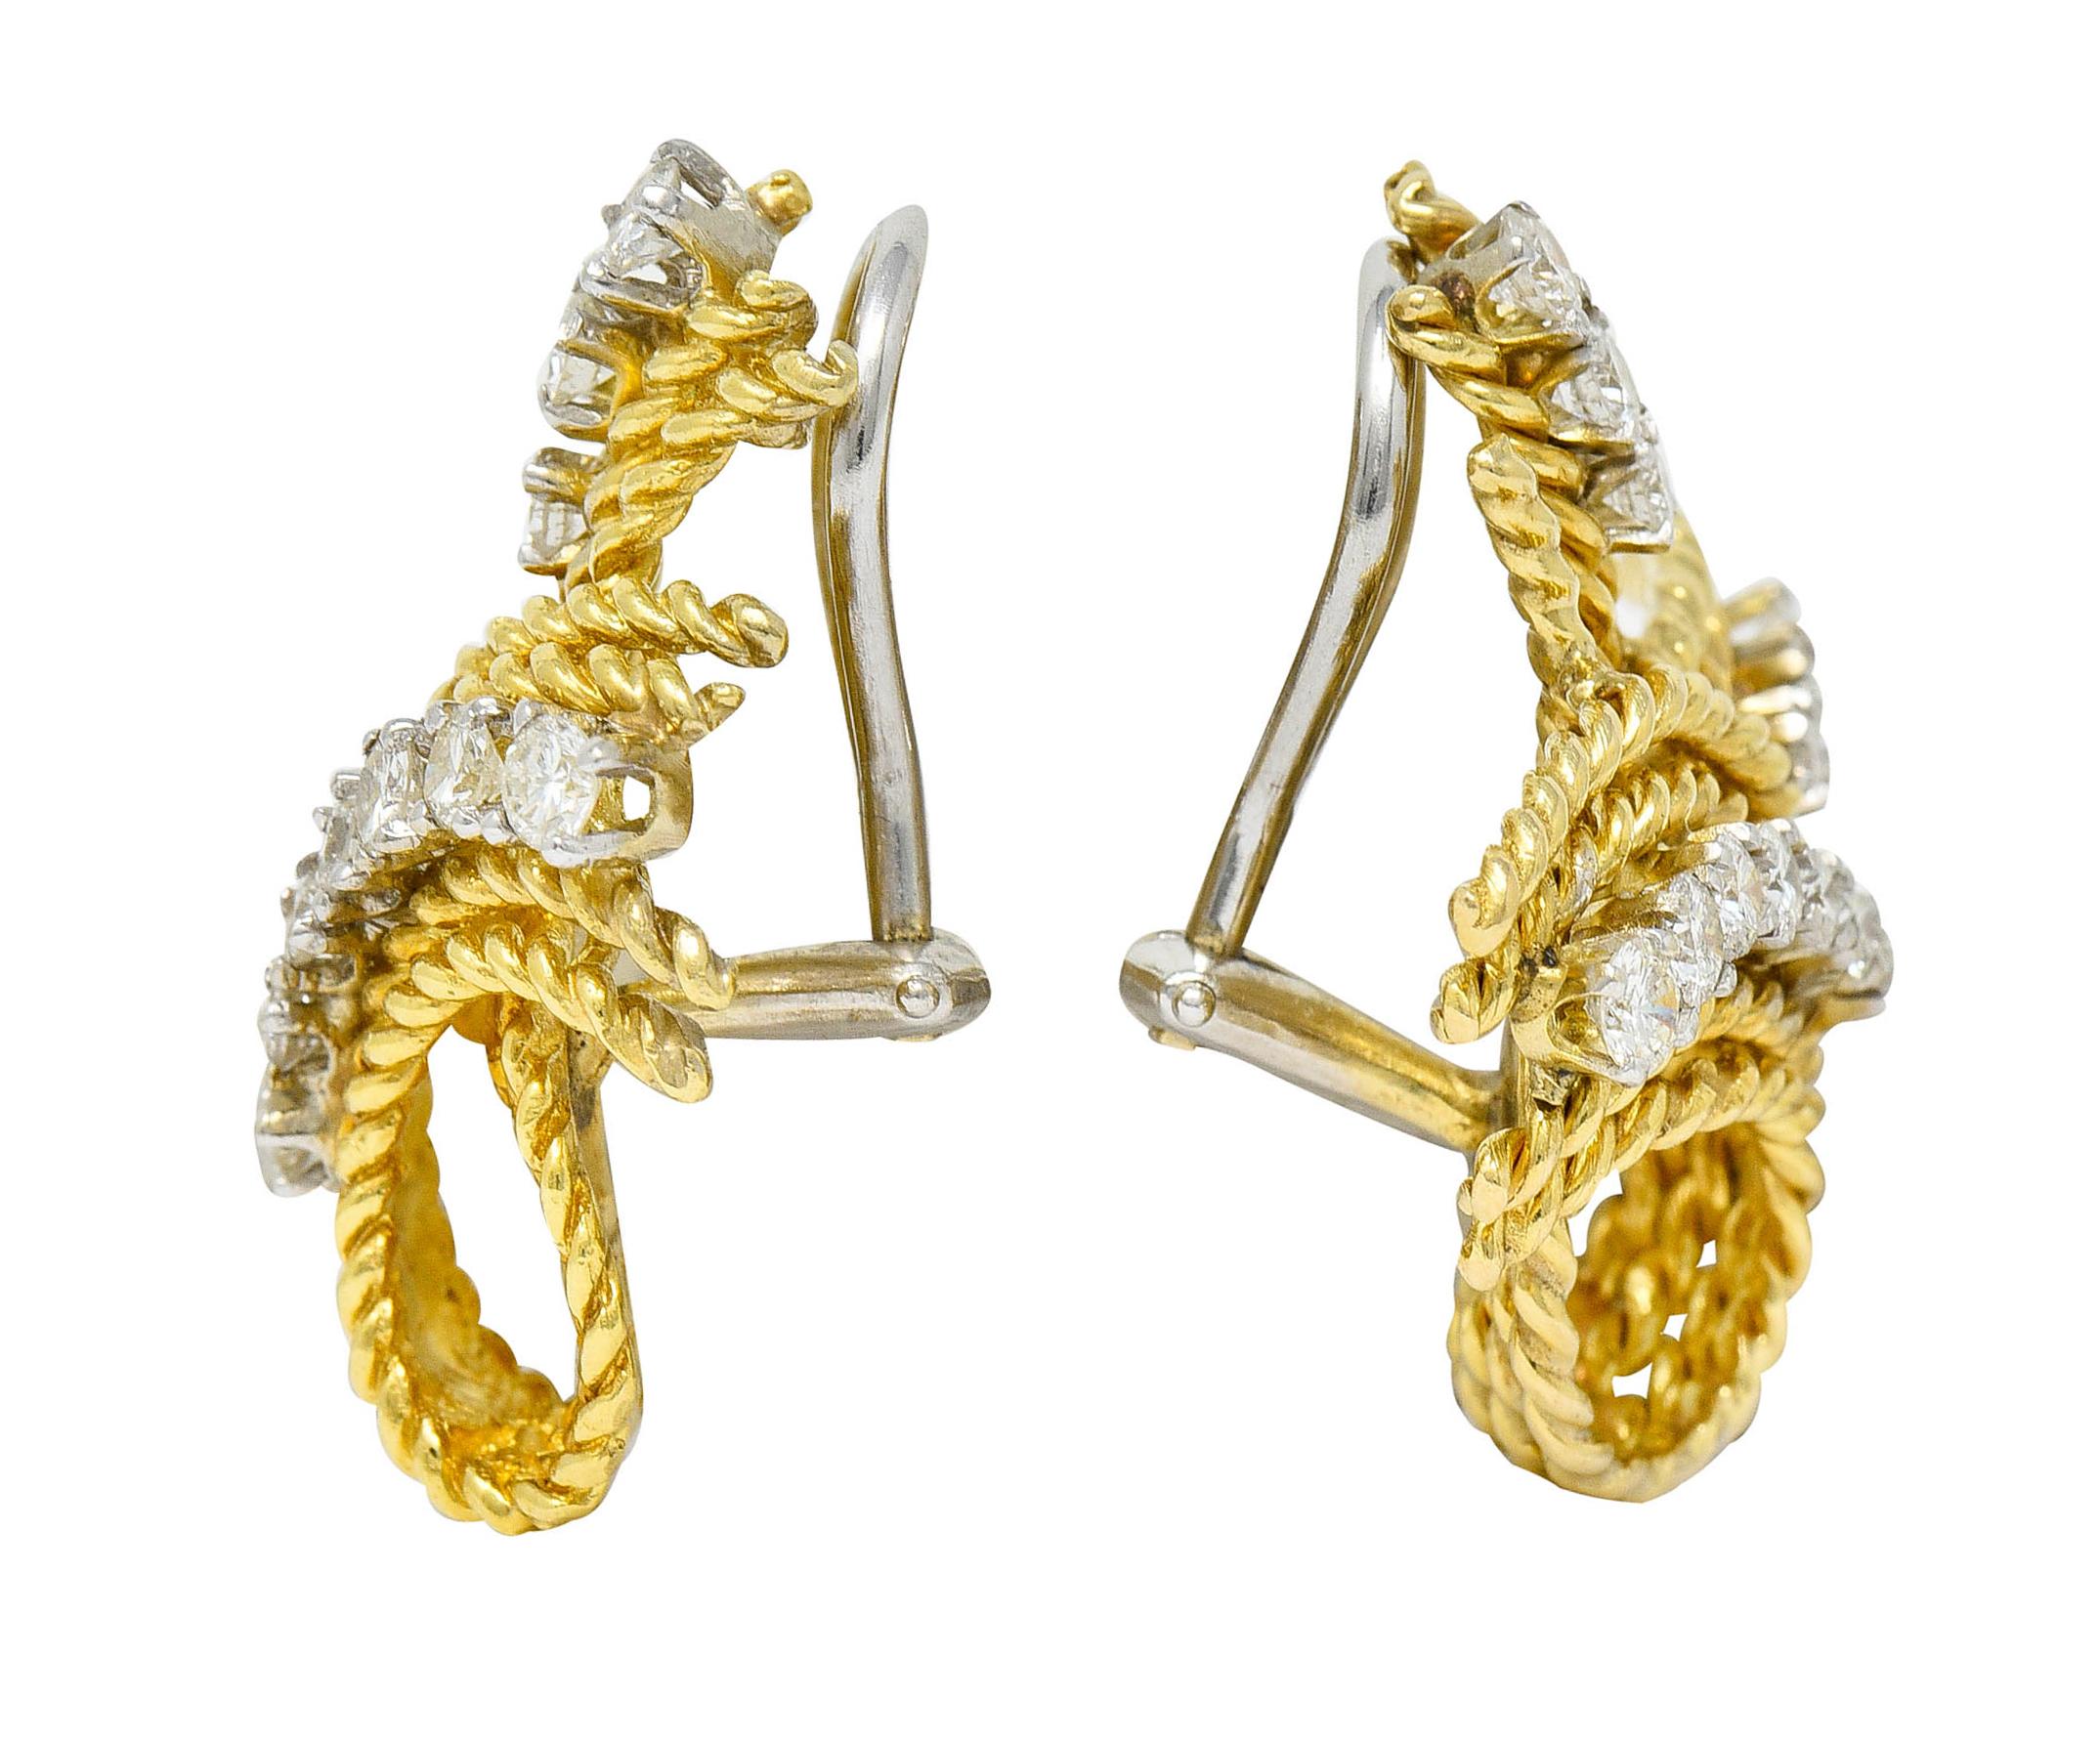 Ear-clip earrings are designed as looped strands of twisted rope - brightly polished

Accented by round brilliant cut diamonds that graduate in size - set in white gold

Weighing in total approximately 1.45 carats with G to J color and SI